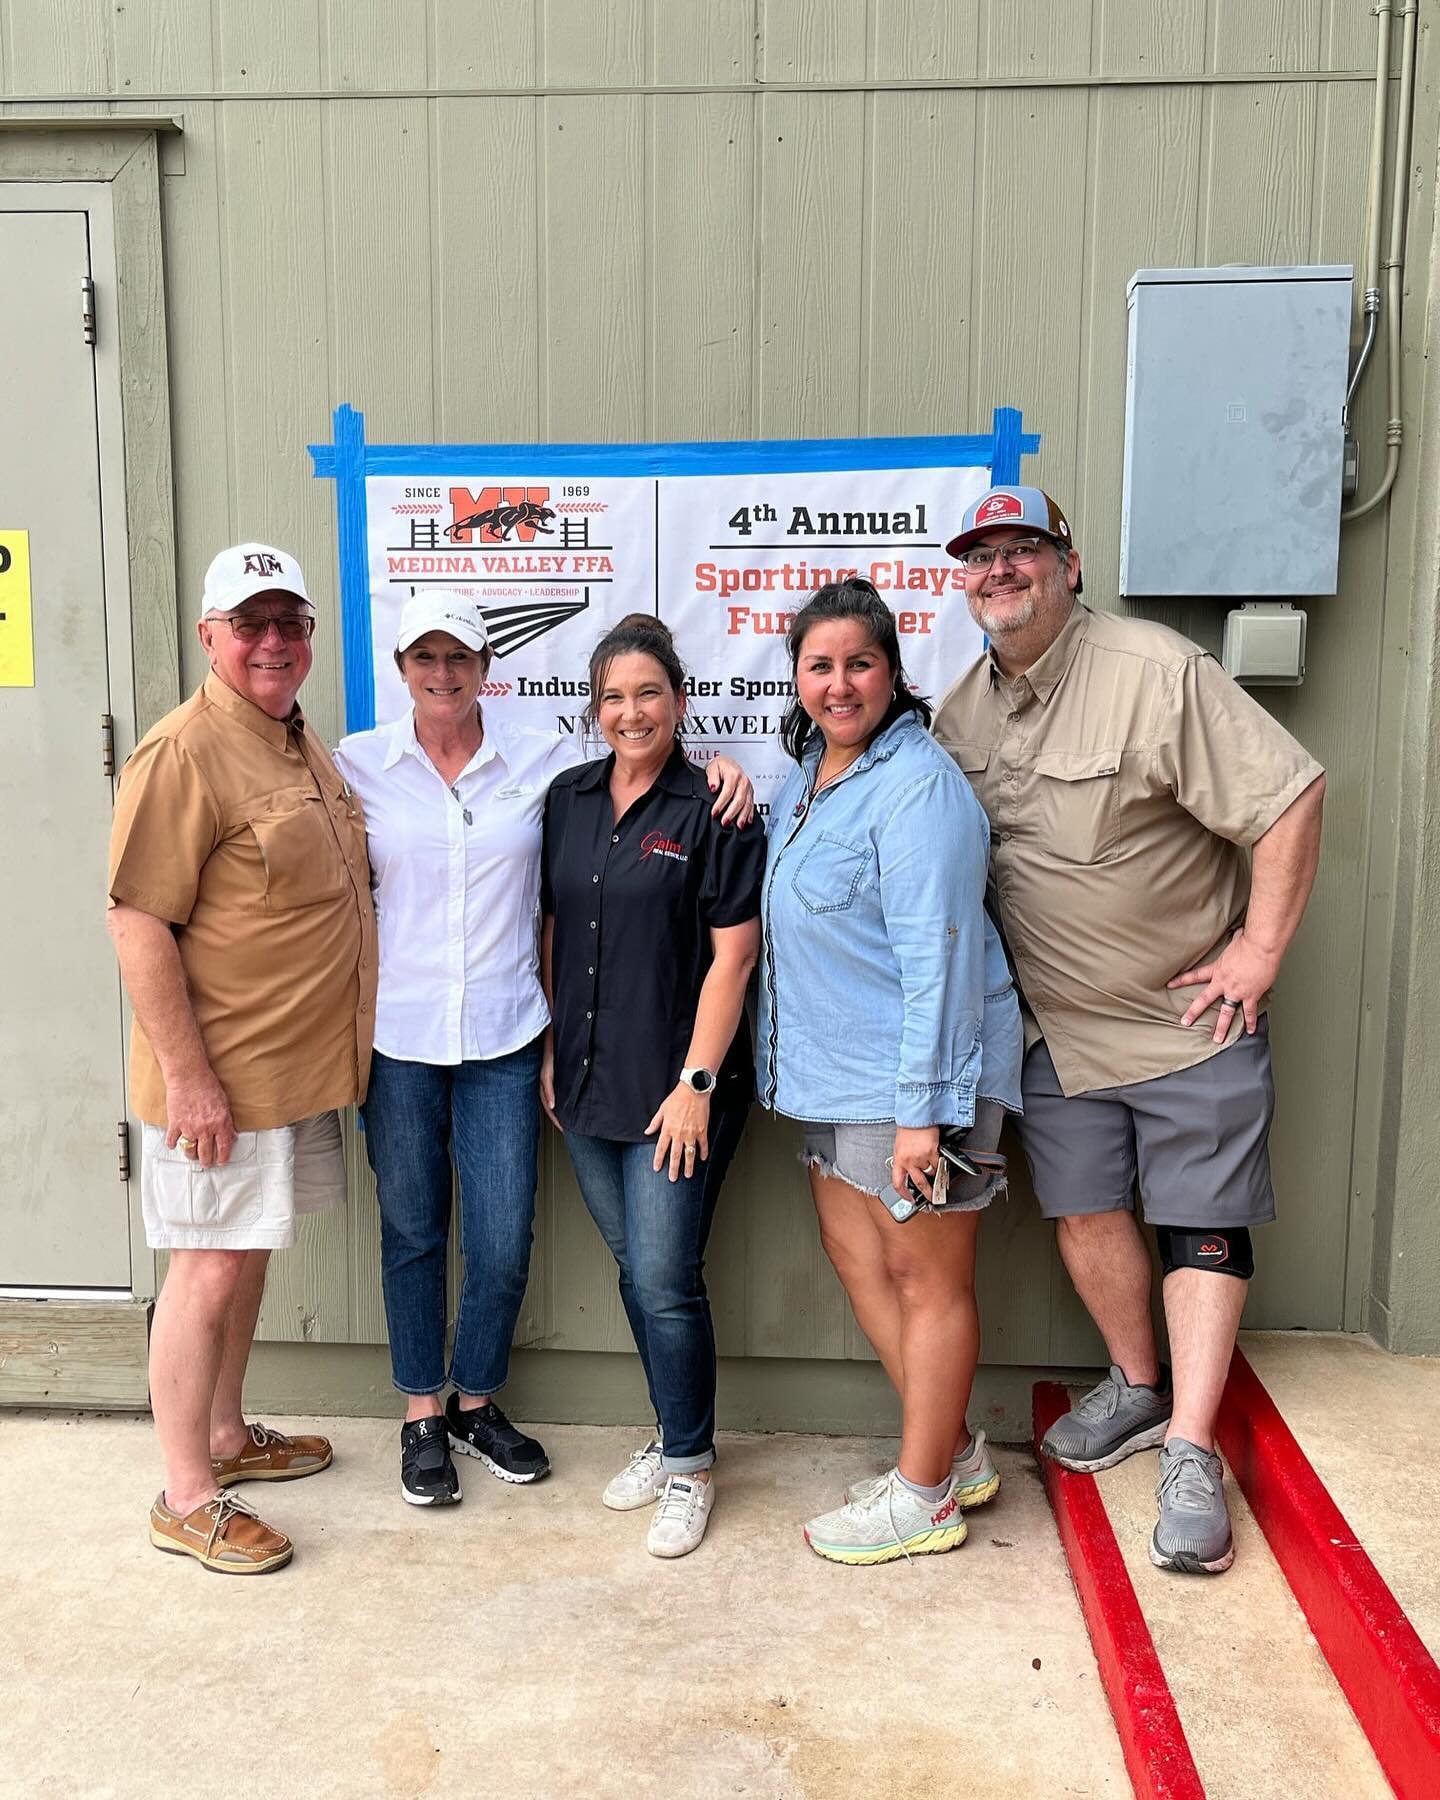 🌾🎯 Supporting the Future of Agriculture! 🎯🌾

We had a blast sponsoring and attending the 4th Annual Medina Valley FFA Sporting Clays Fundraiser! It was a fantastic day filled with camaraderie, fun, and, of course, some friendly competition&mdash;